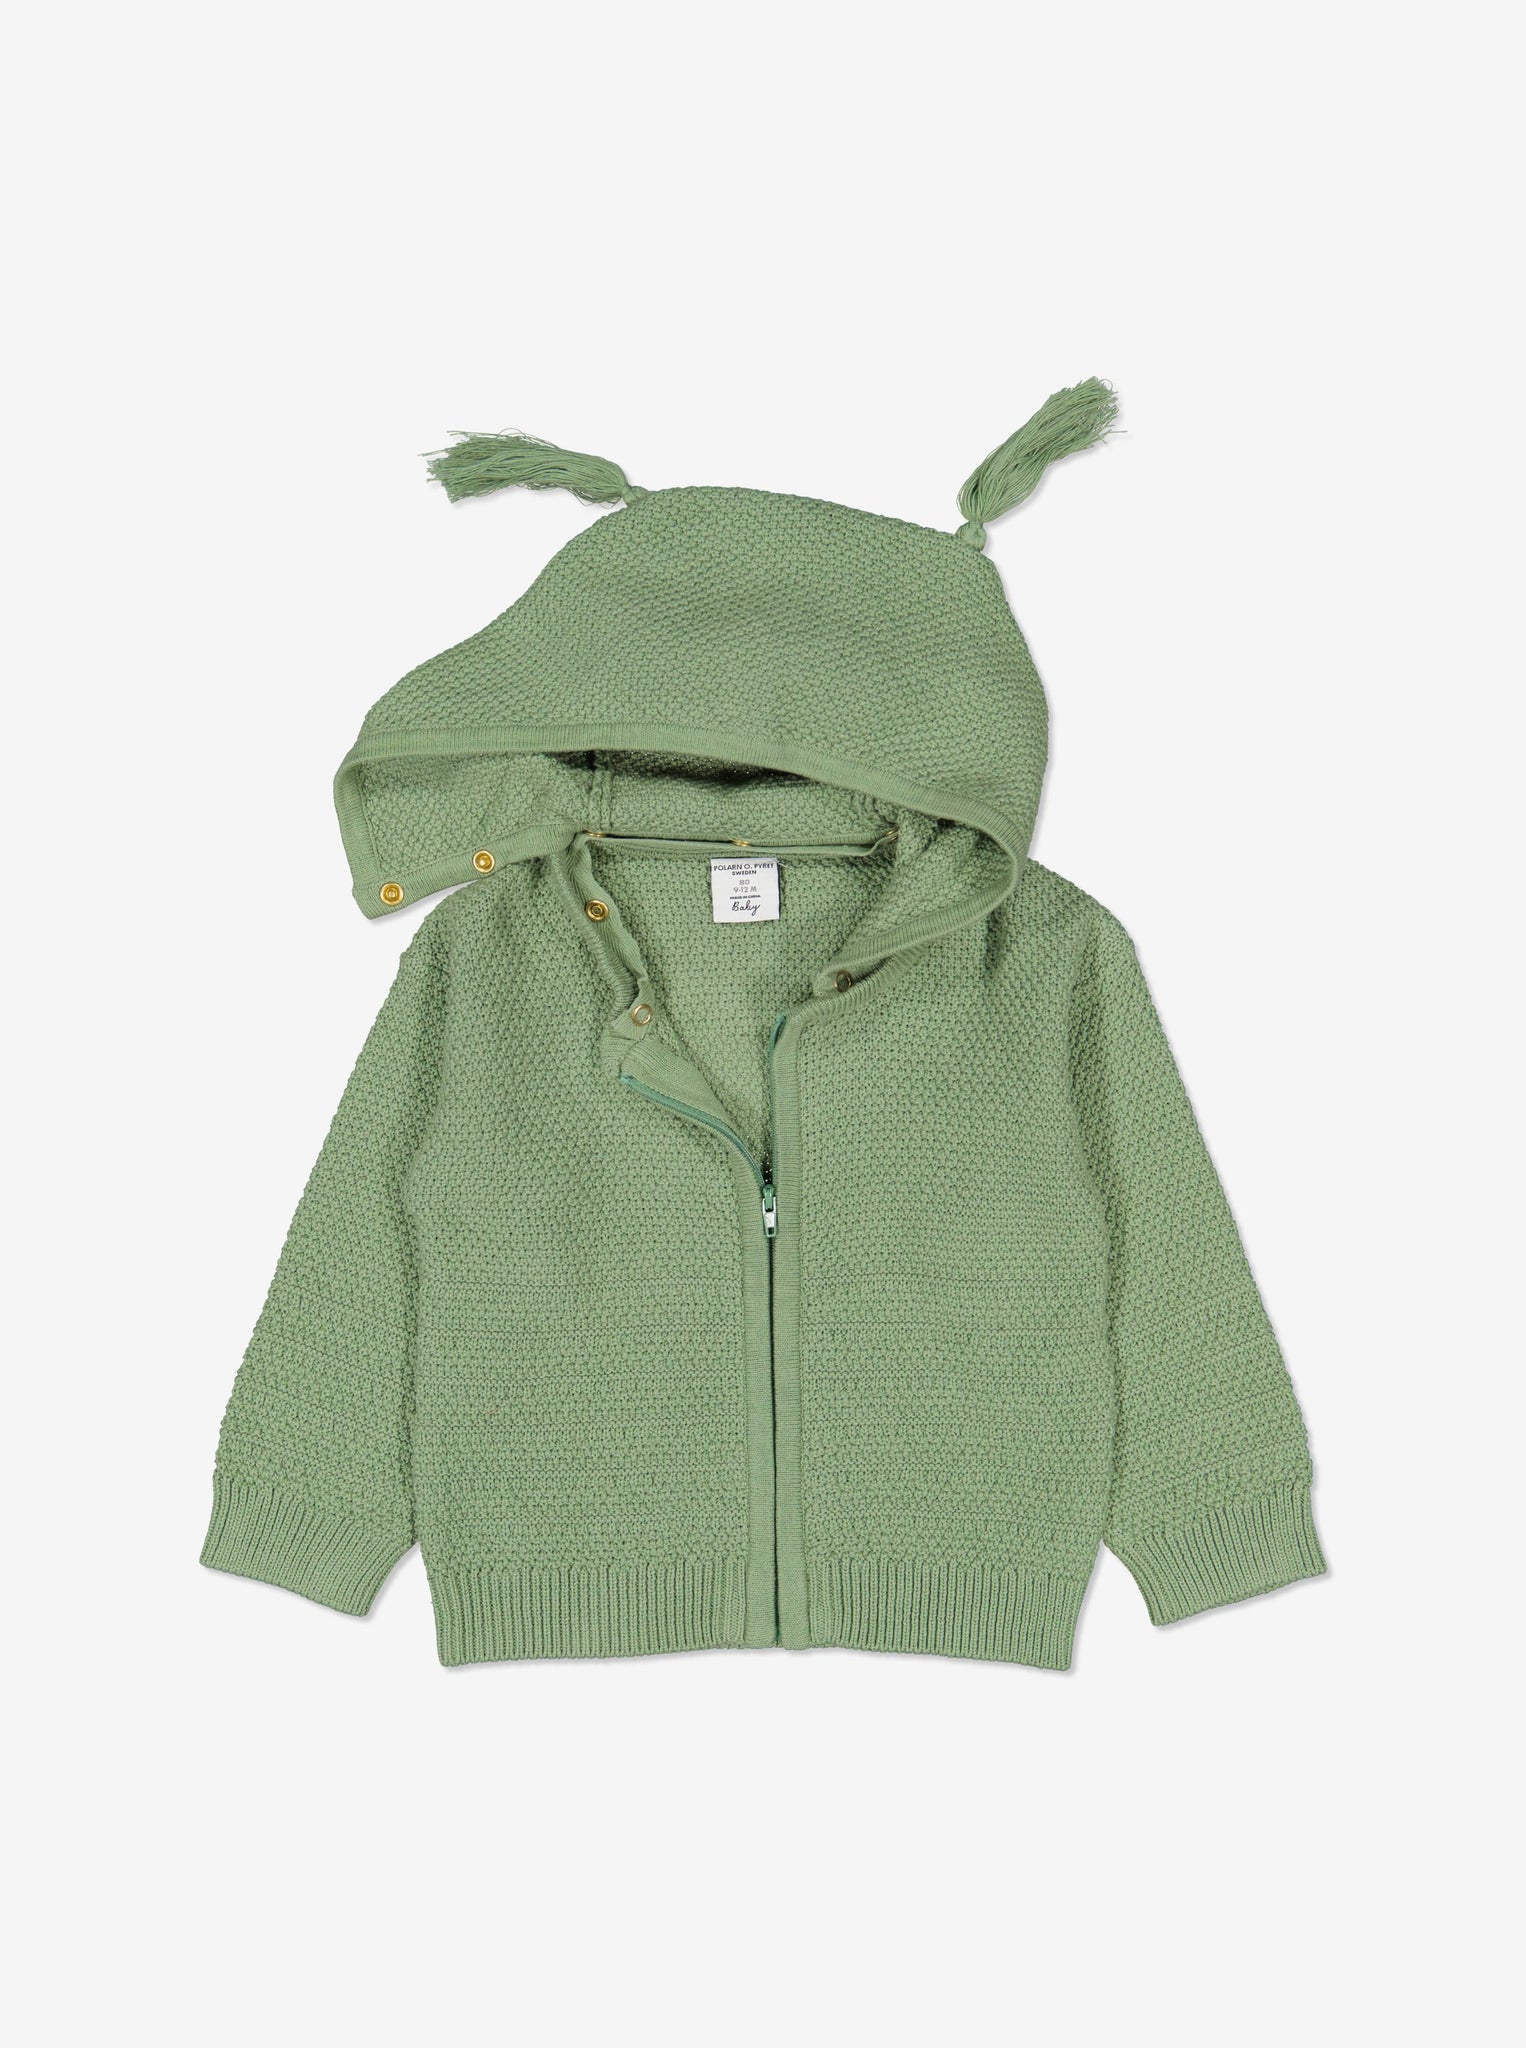  Organic Knitted Green Newborn Baby Hoodie from Polarn O. Pyret Kidswear. Made with 100% organic cotton.